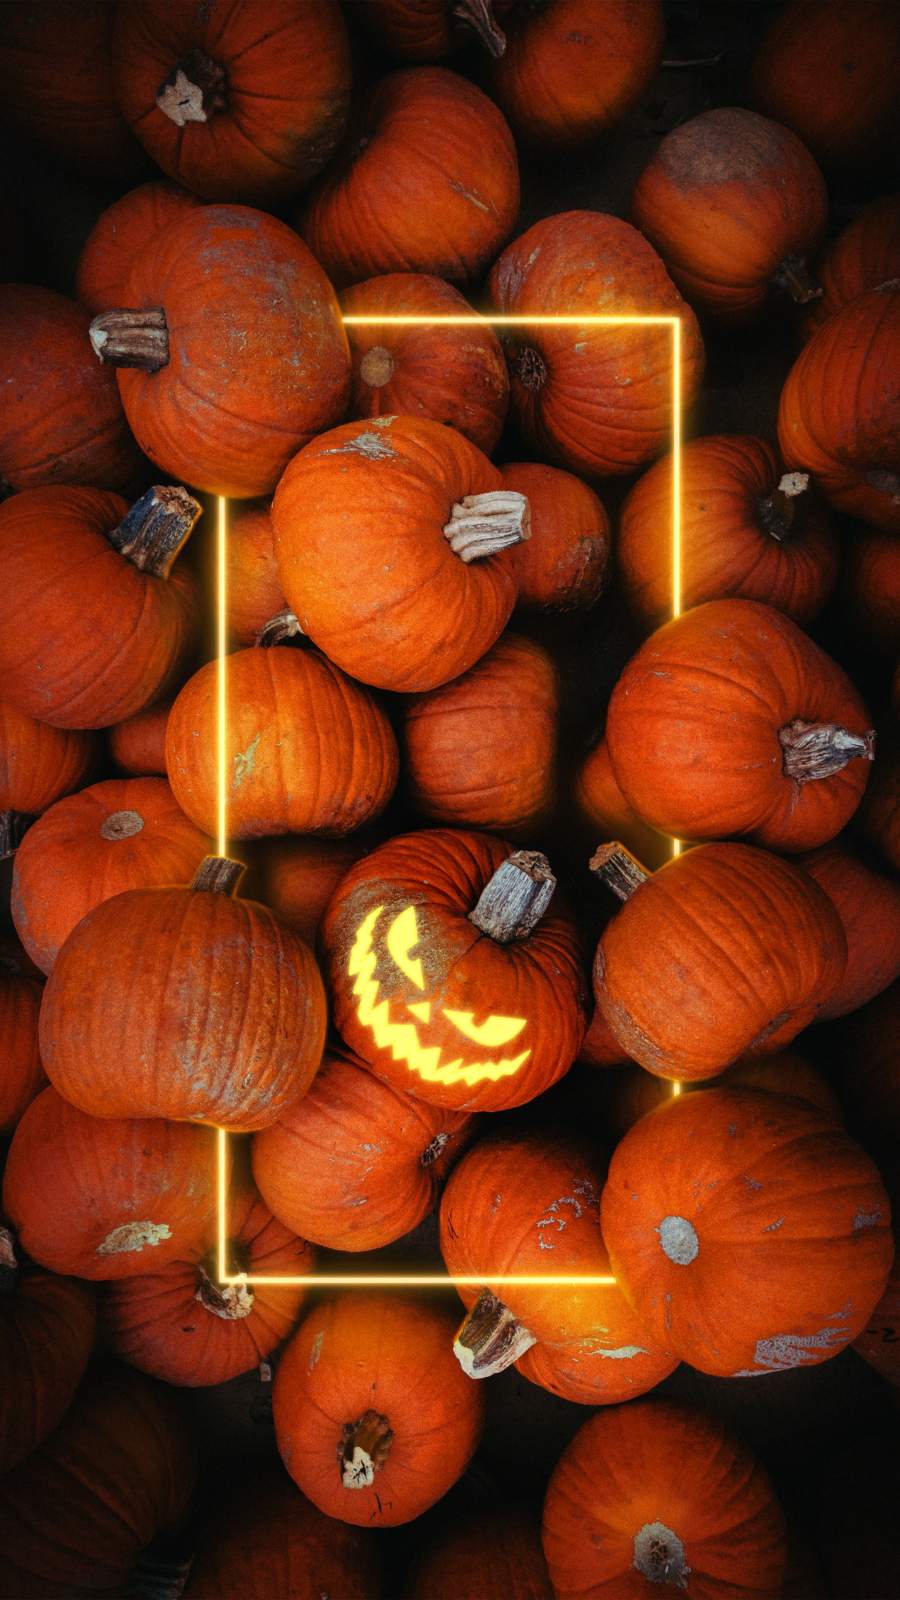 Pumpkin wallpapers for iPhone download them now